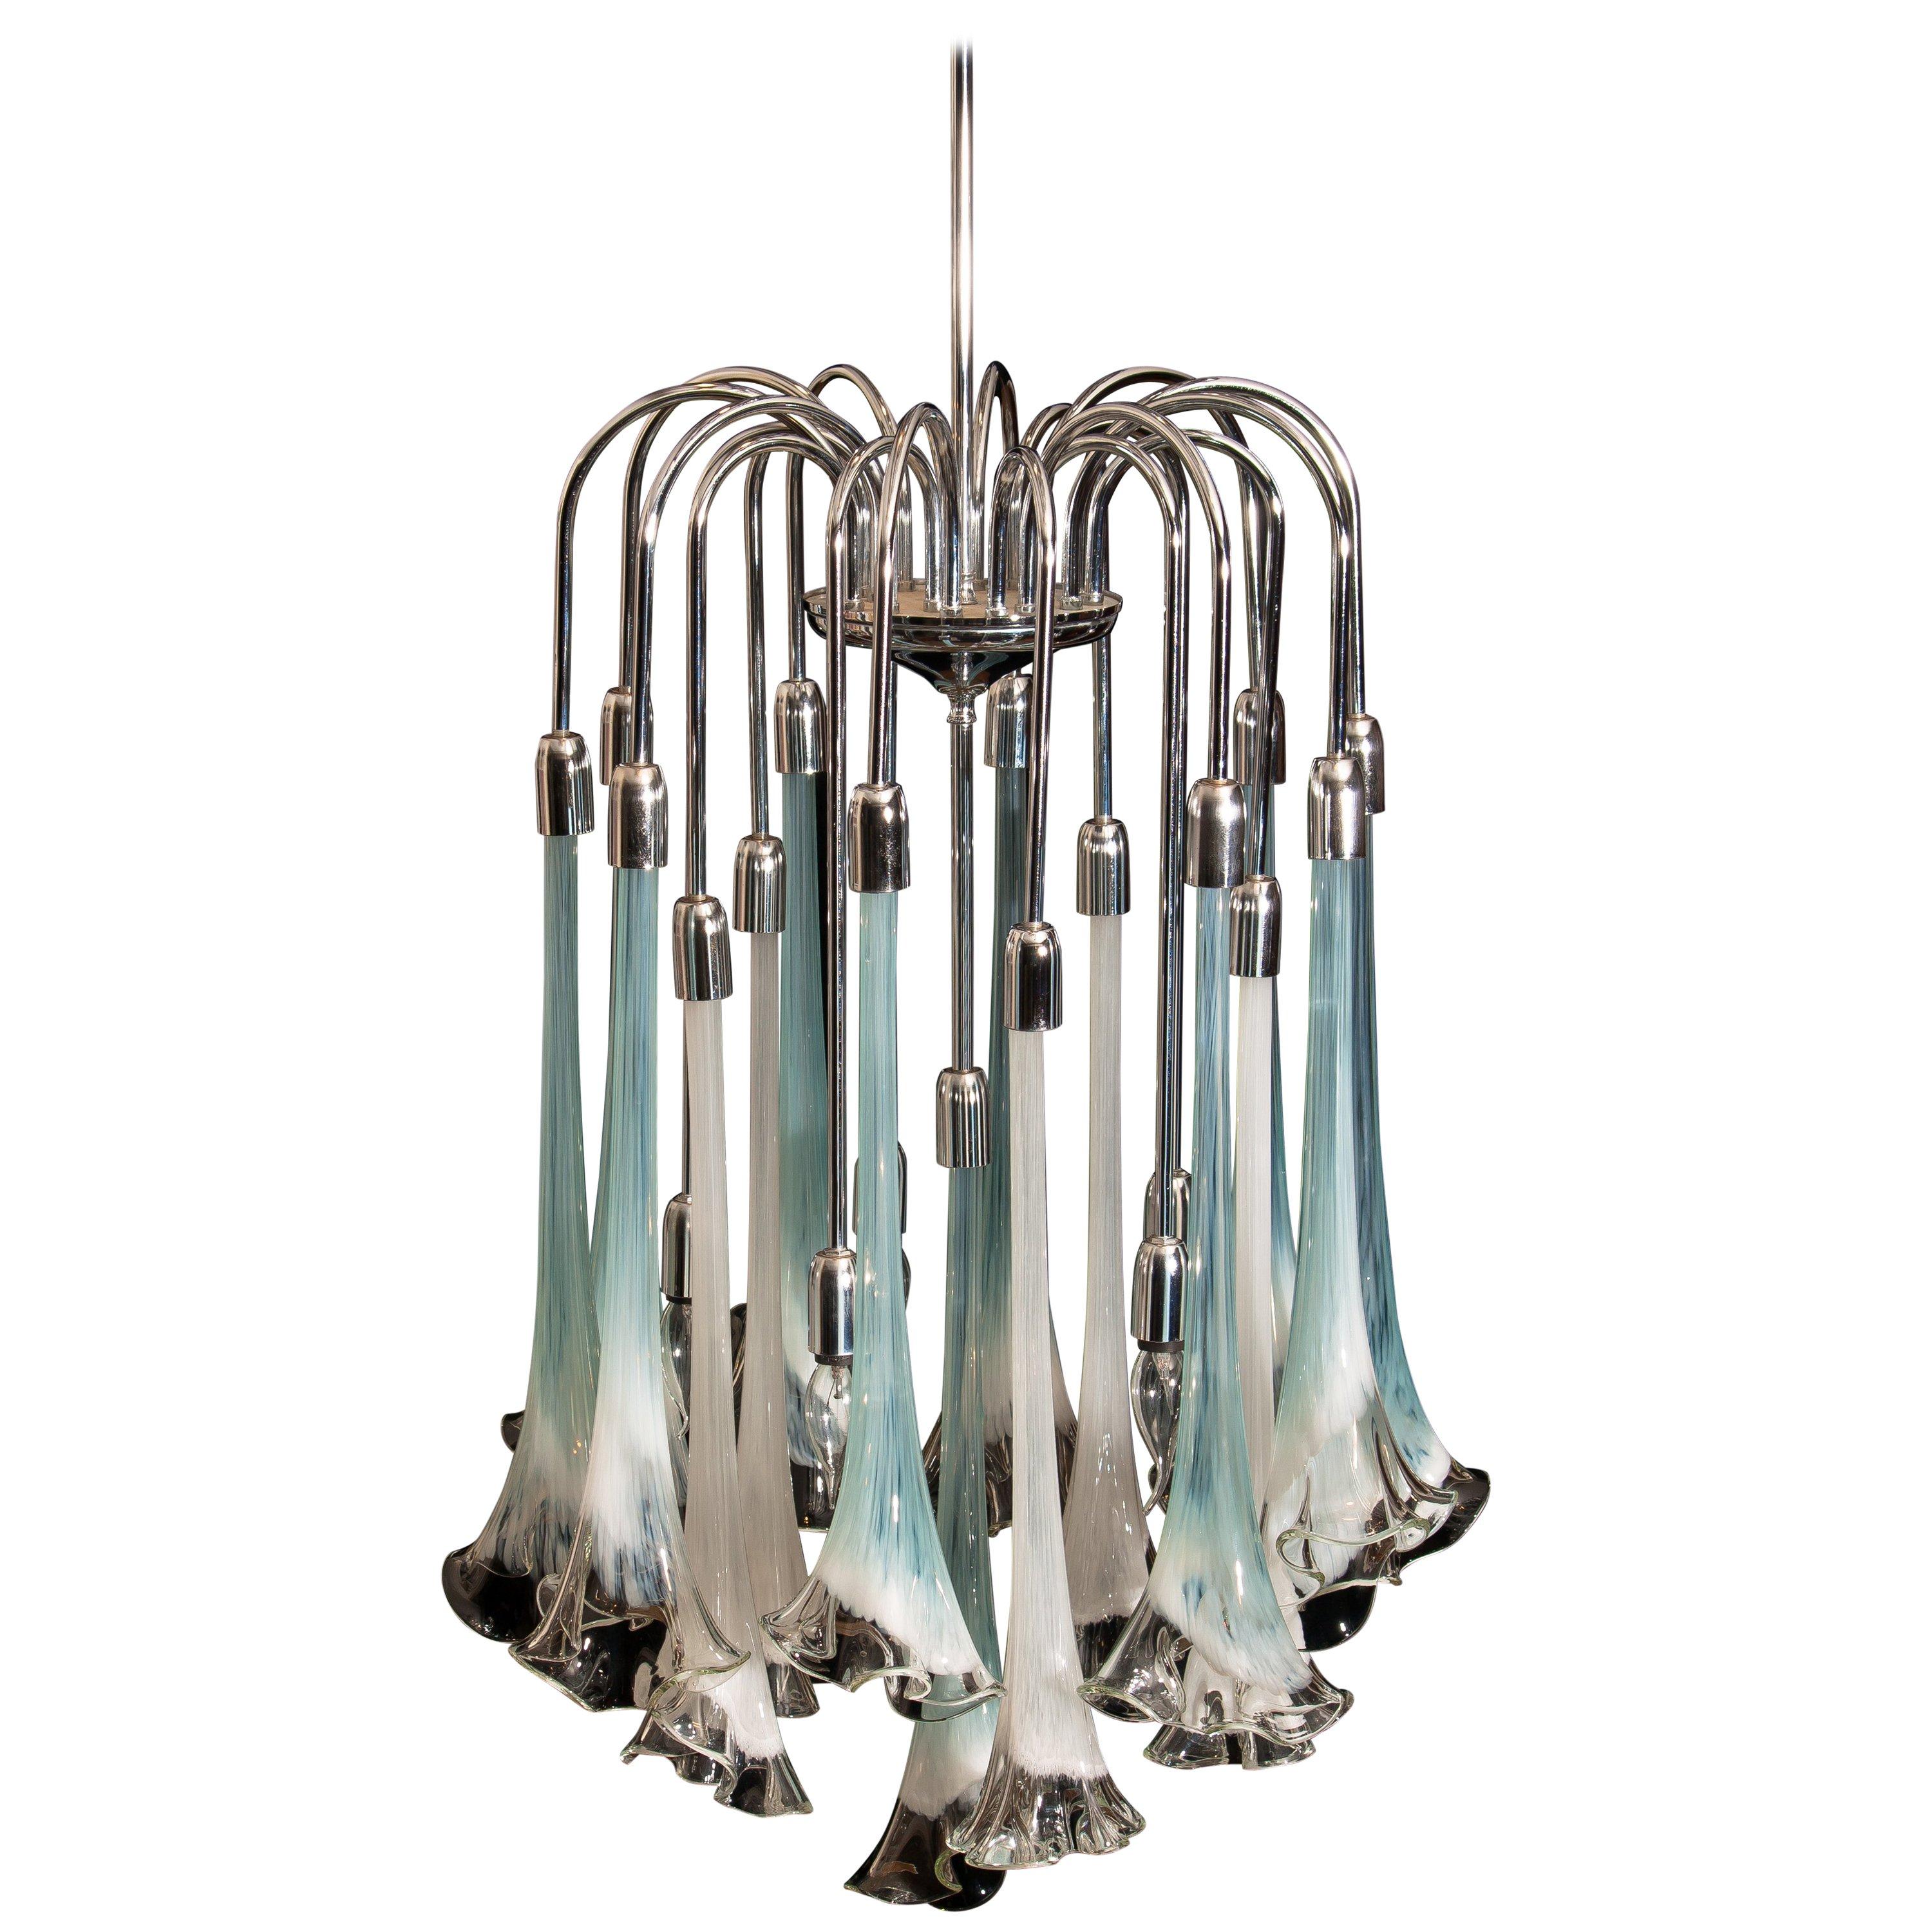 Extremely beautiful and rare Mazzega chandelier filled with Murano art glass.
The 16 large white and turquoise glass flowers are all in excellent condition.
Also, the chrome fixture is perfect. Technically 100%.
The chandelier has five E14 / E17